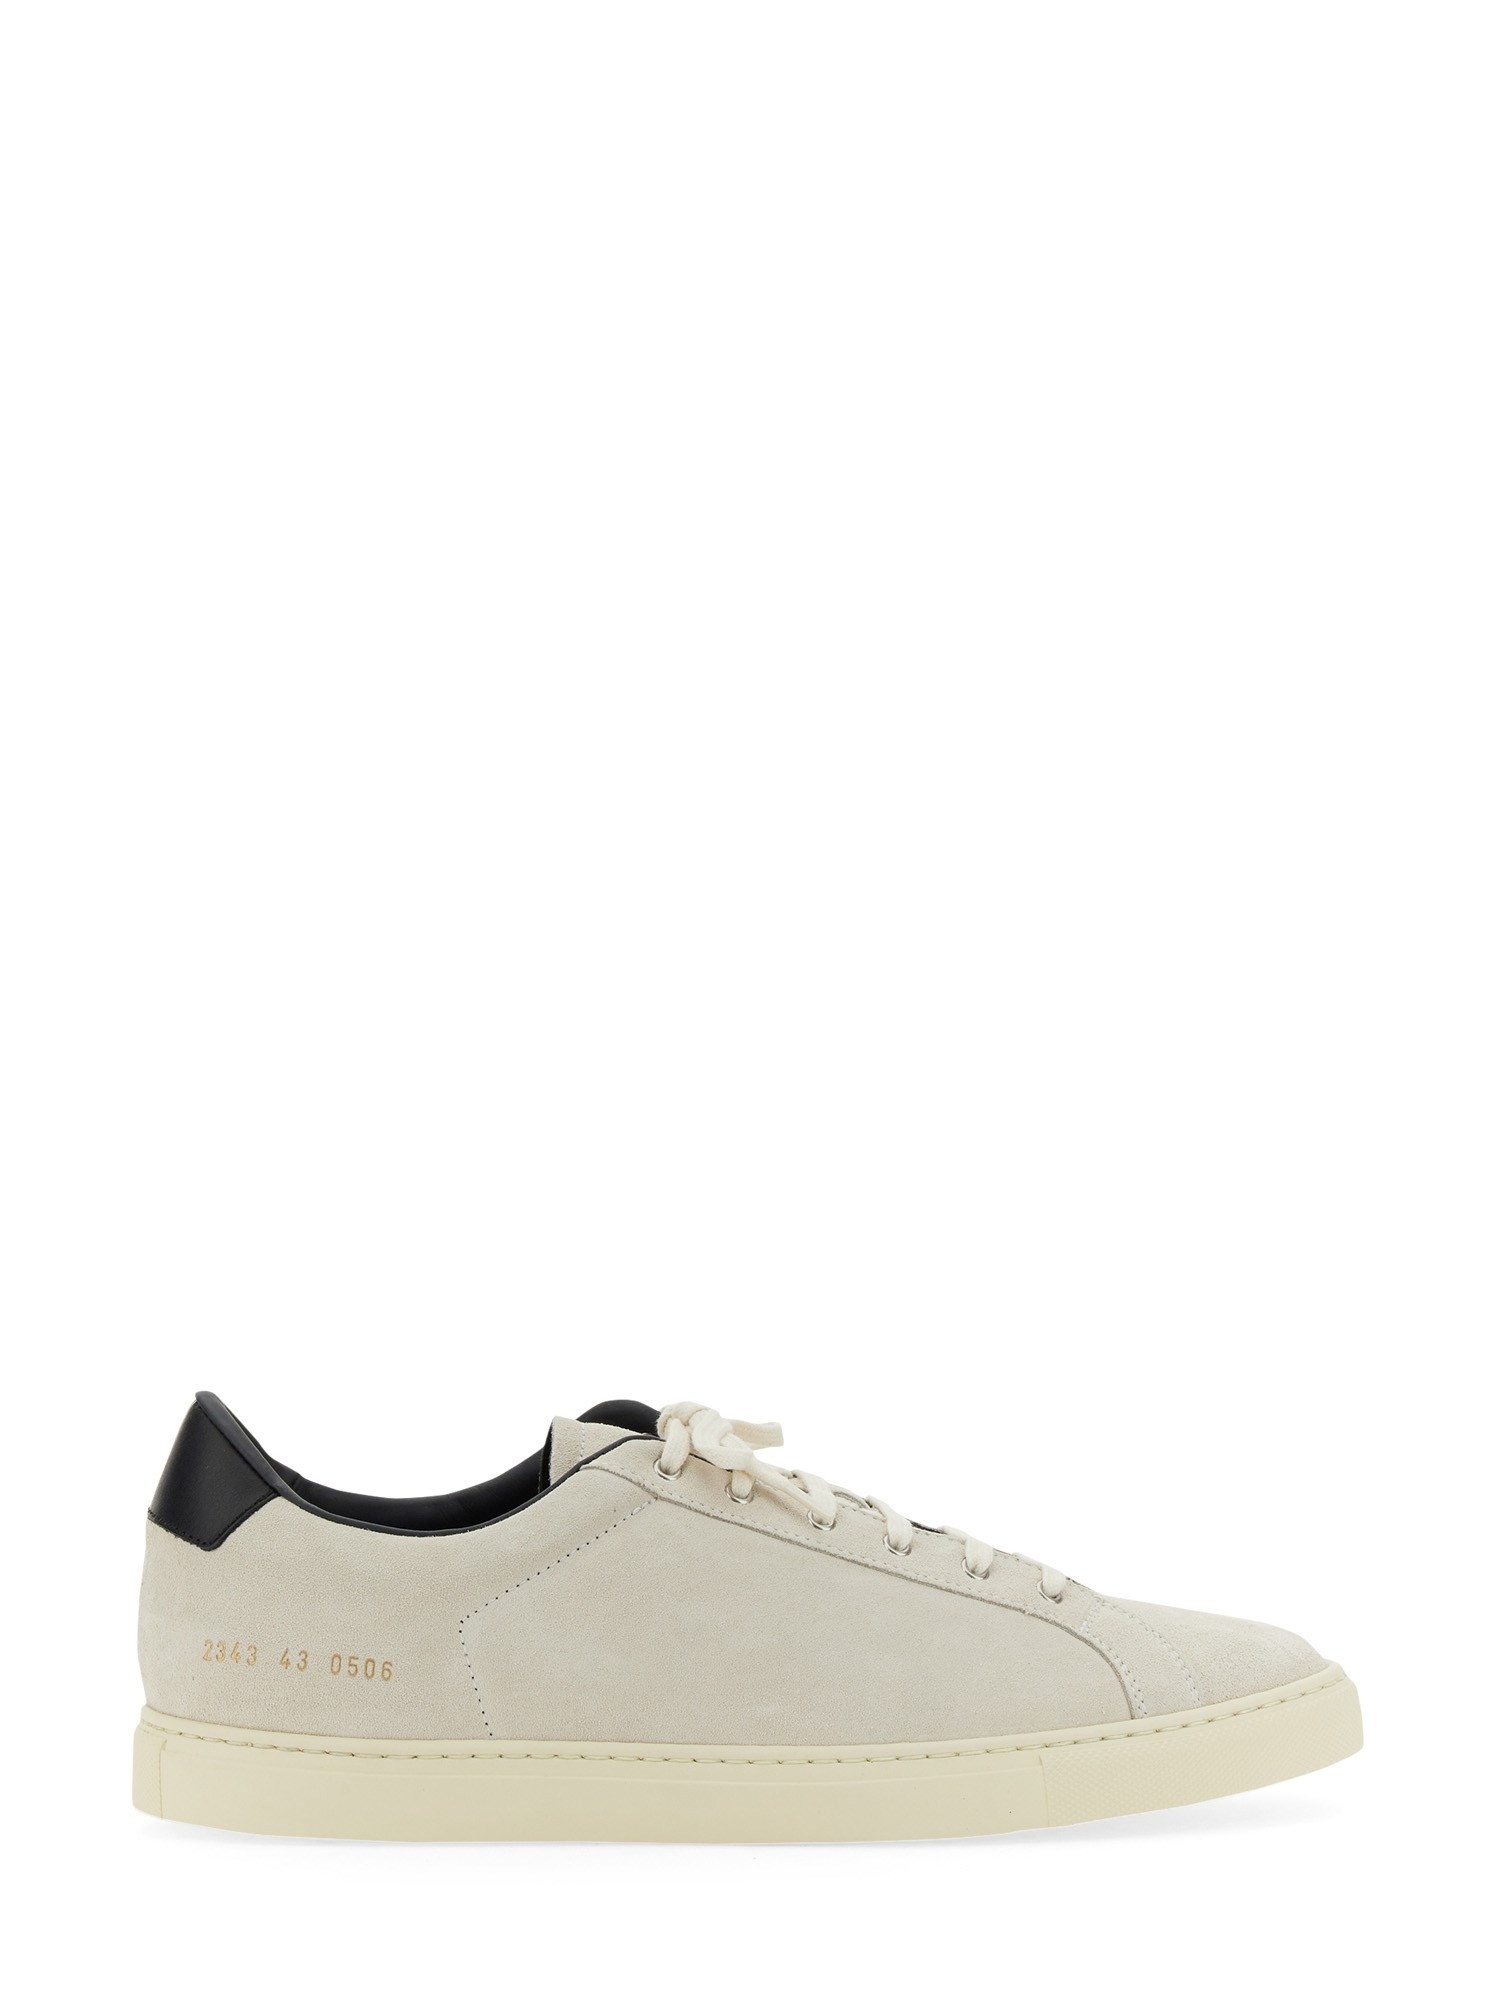 common projects suede sneaker